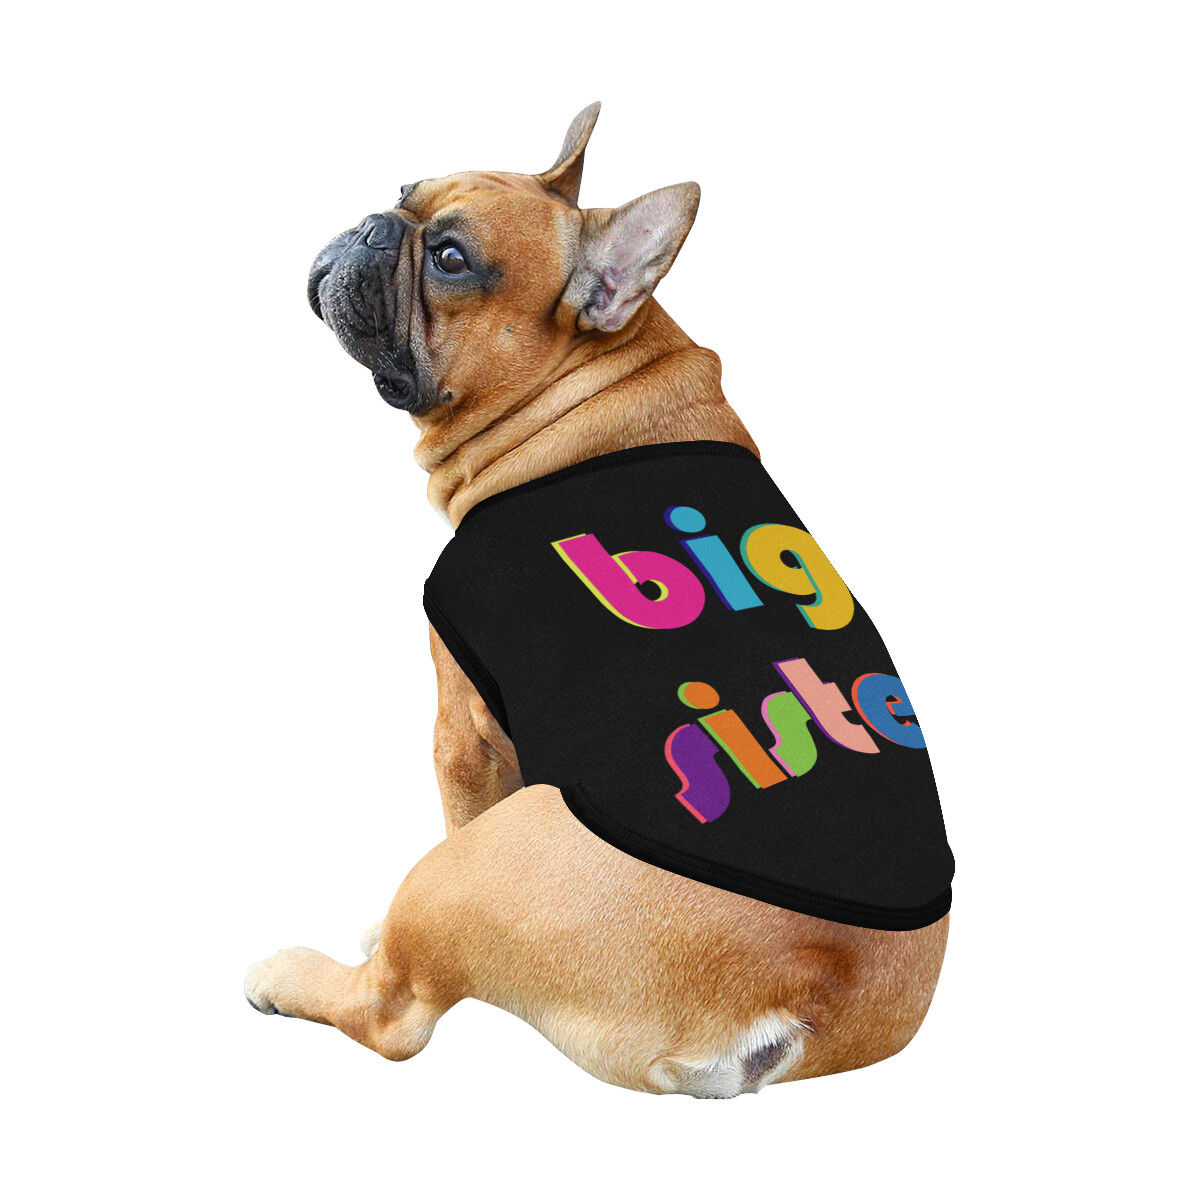 🐕 Big Sister Dog Tank Top, Dog shirt, Dog clothes, Gifts, front back print, 7 sizes XS to 3XL, dog t-shirt, dog t-shirt, dog gift, black